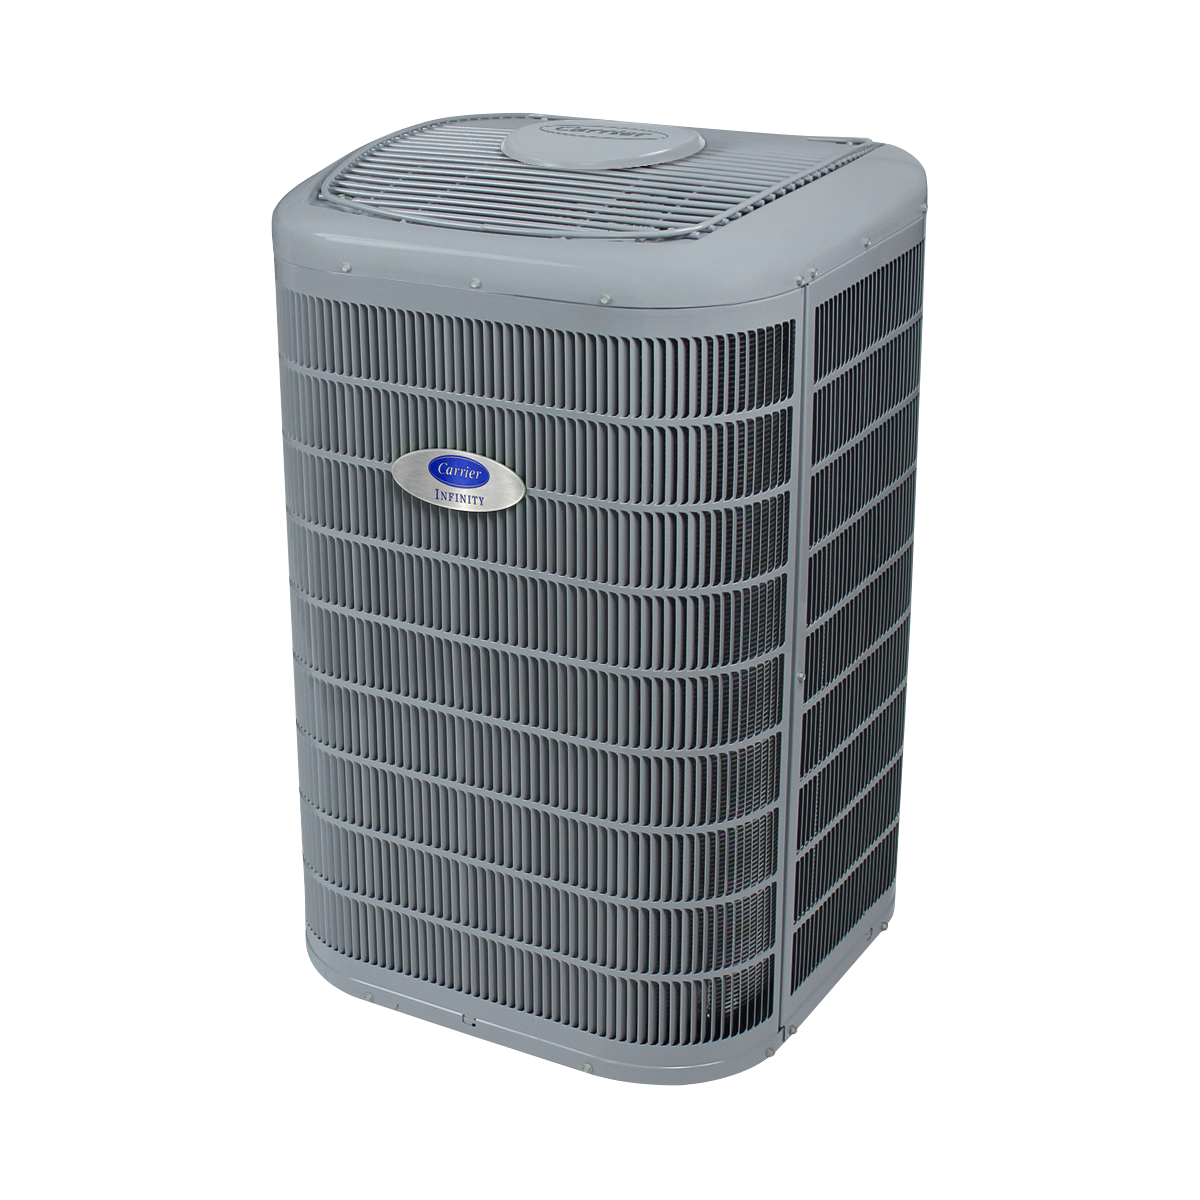 Carrier Infinity® 19 Central Air Conditioner with Greenspeed Intelligence